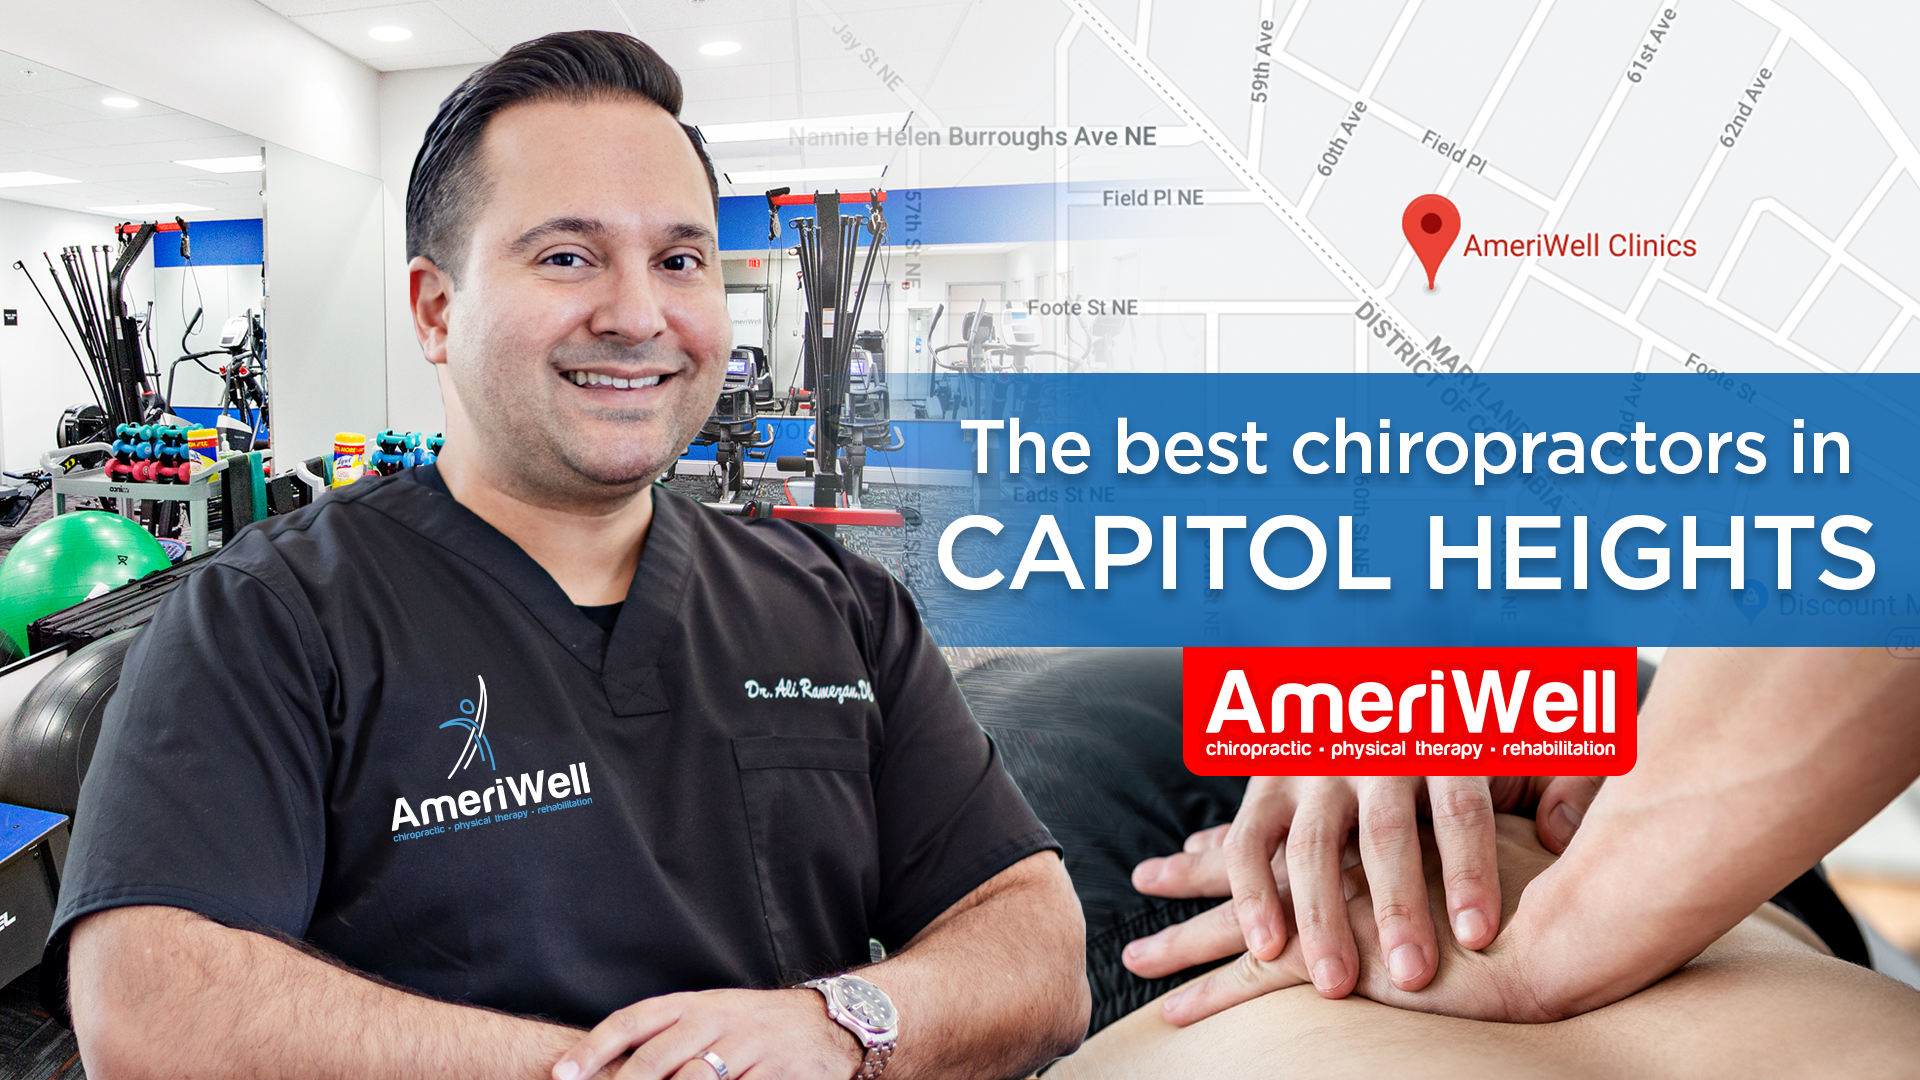 Capitol Heights – Ameriwell Clinics the best chiropractors